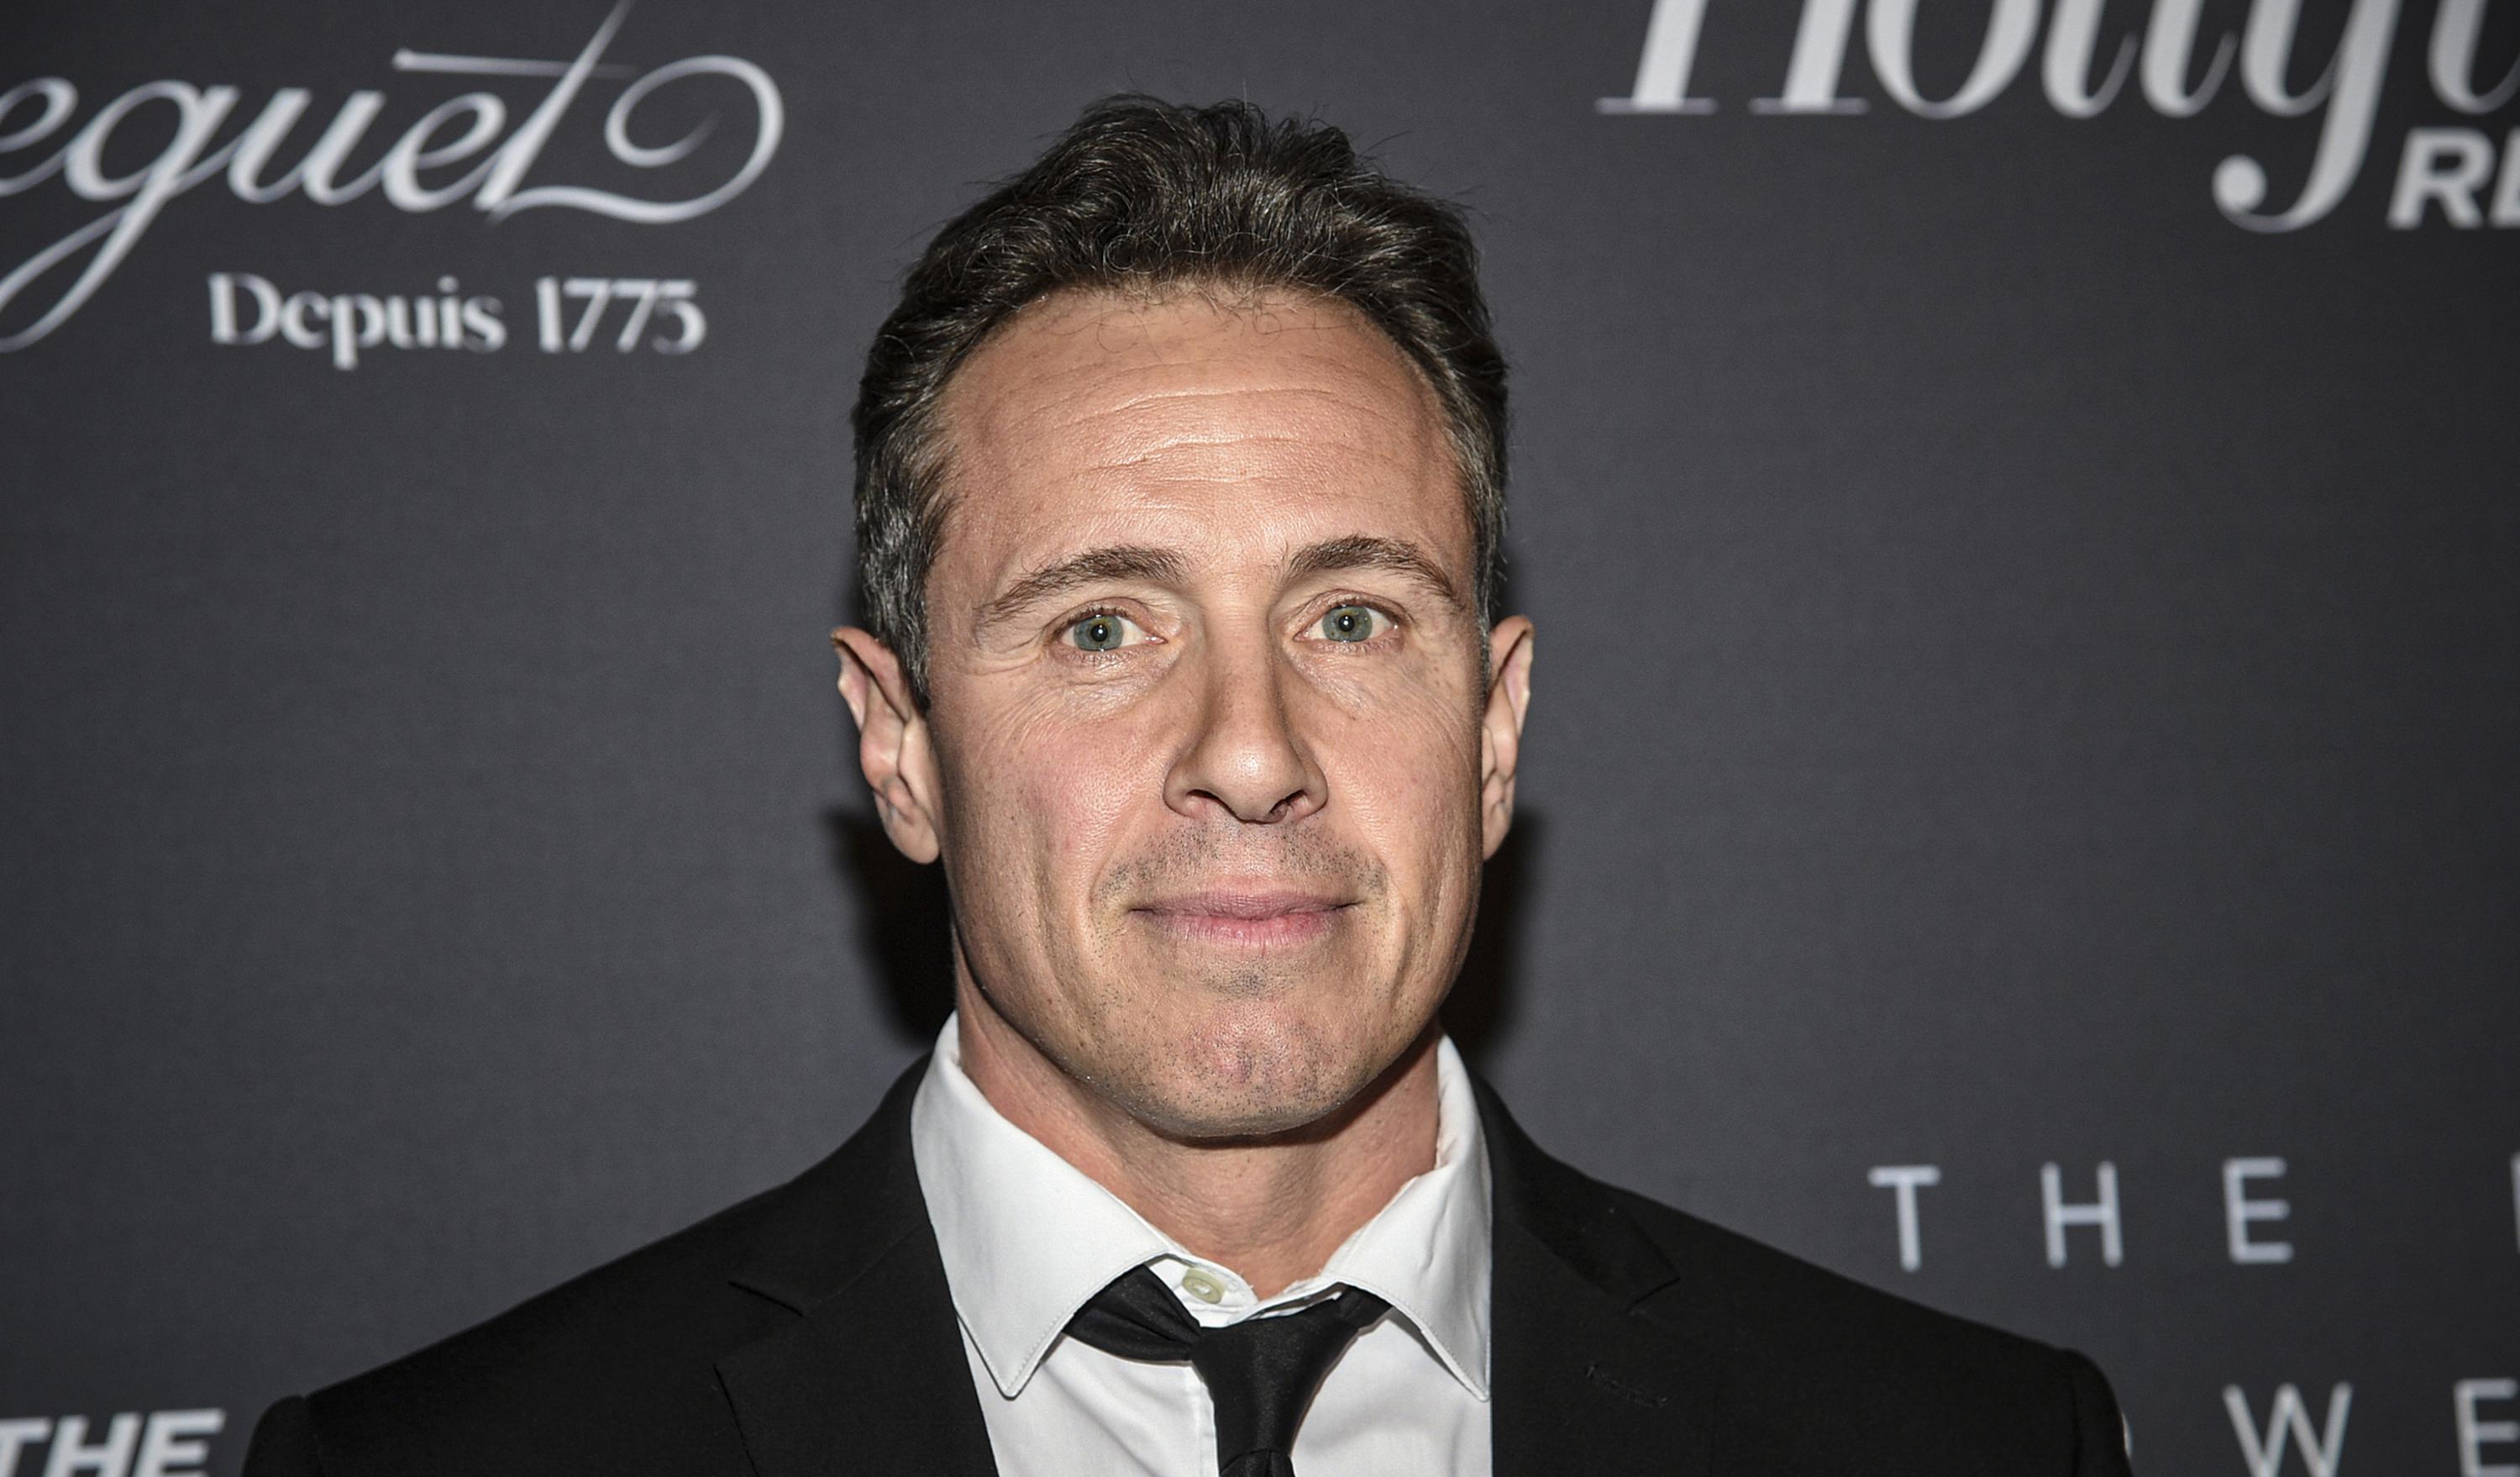 Publisher scraps plans to release book by Chris Cuomo – Associated Press